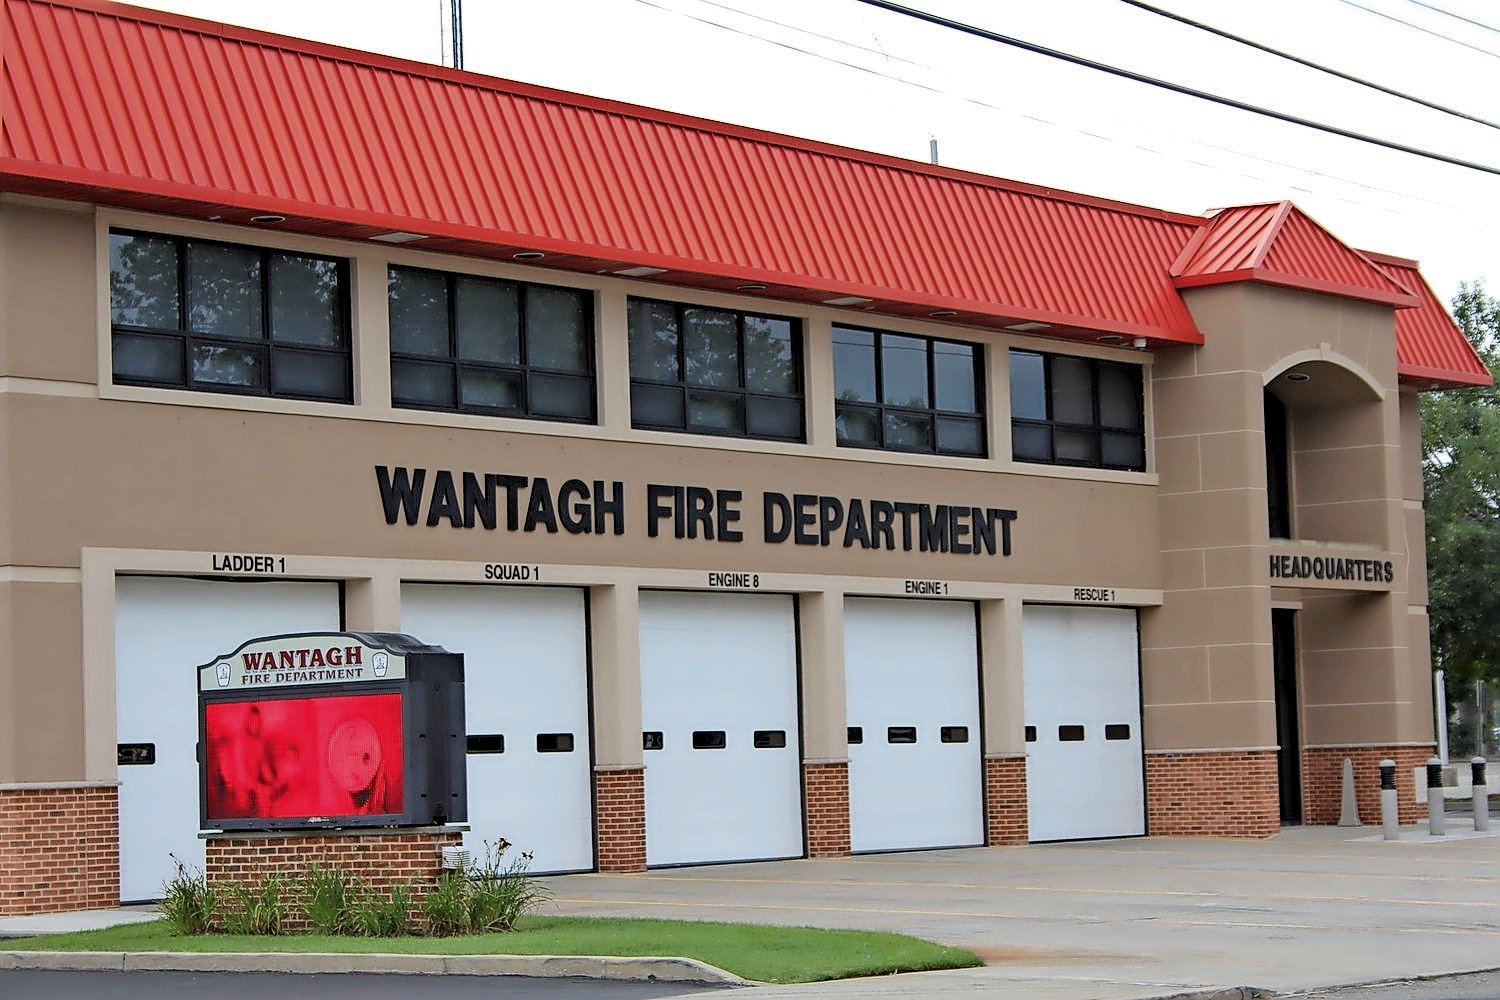 A fire medic for the Wantagh Fire Department claims she was sexually assaulted at a birthday party at the firehouse last year.